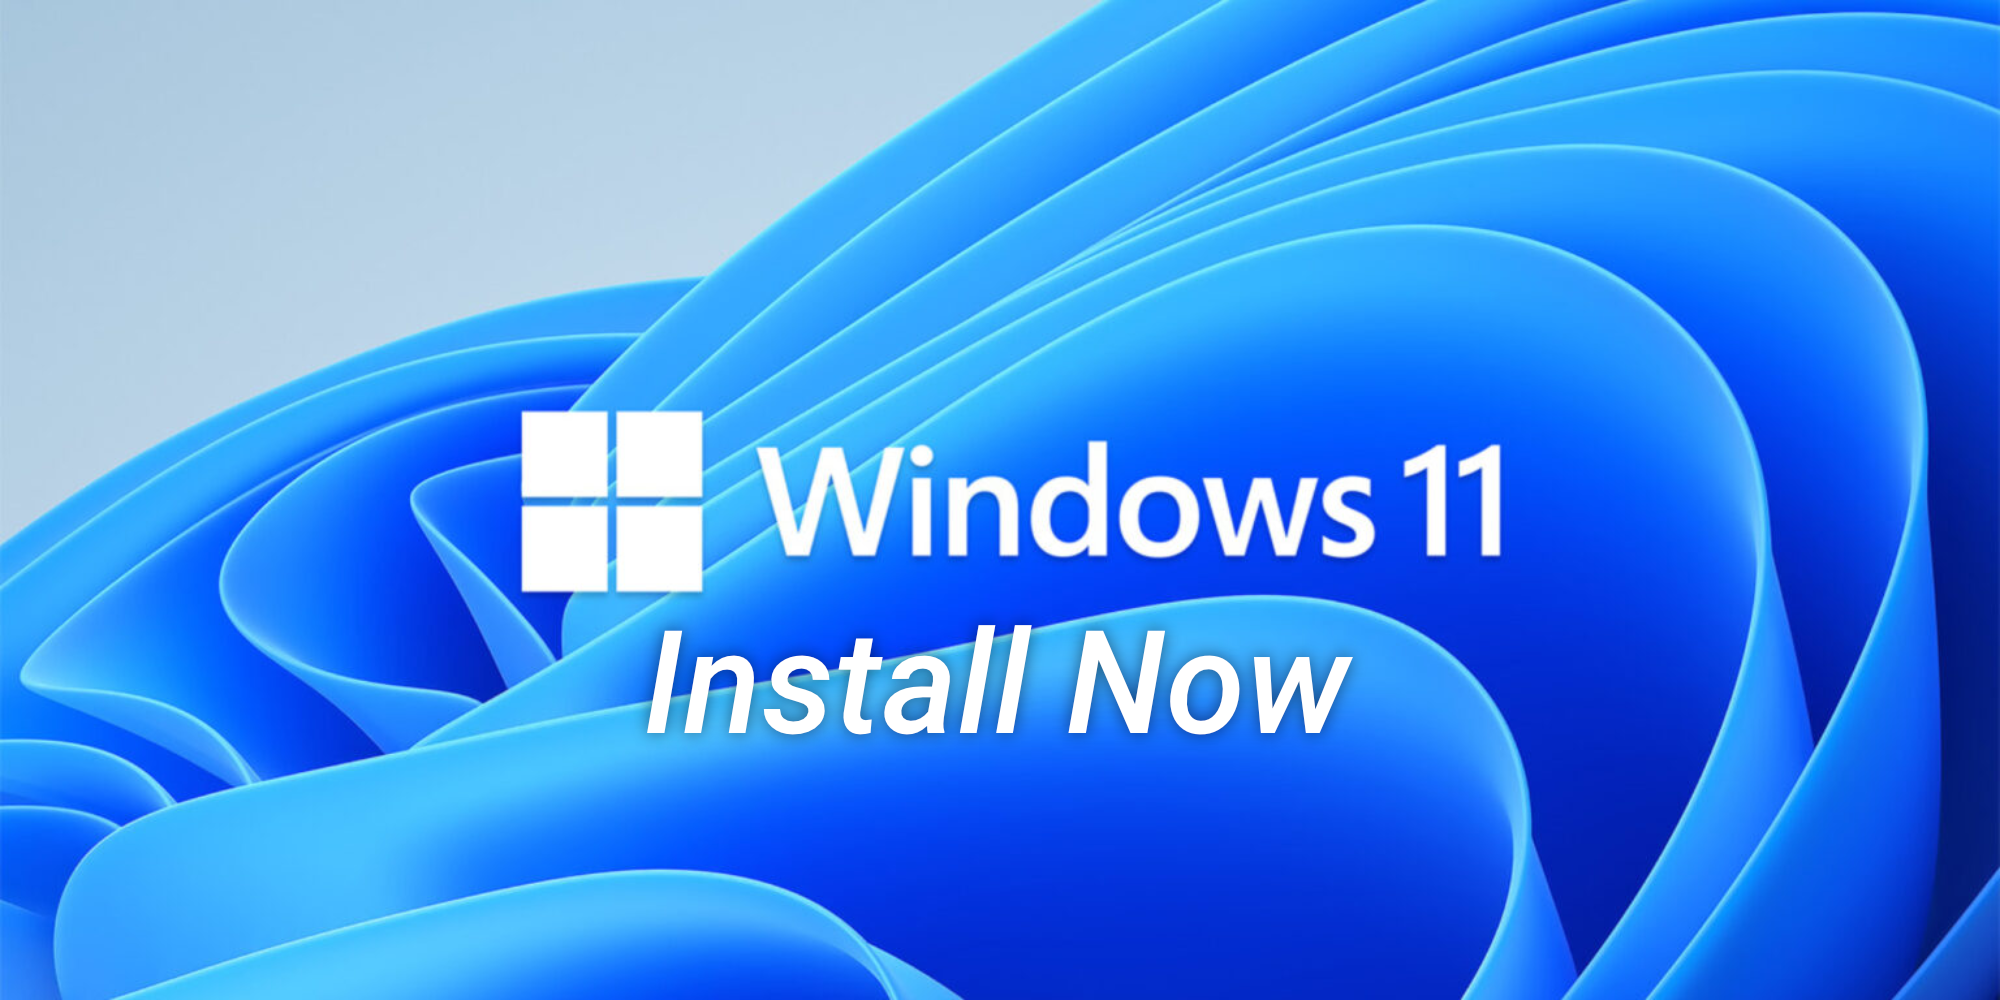 Can’t wait? Install Windows 11 right now